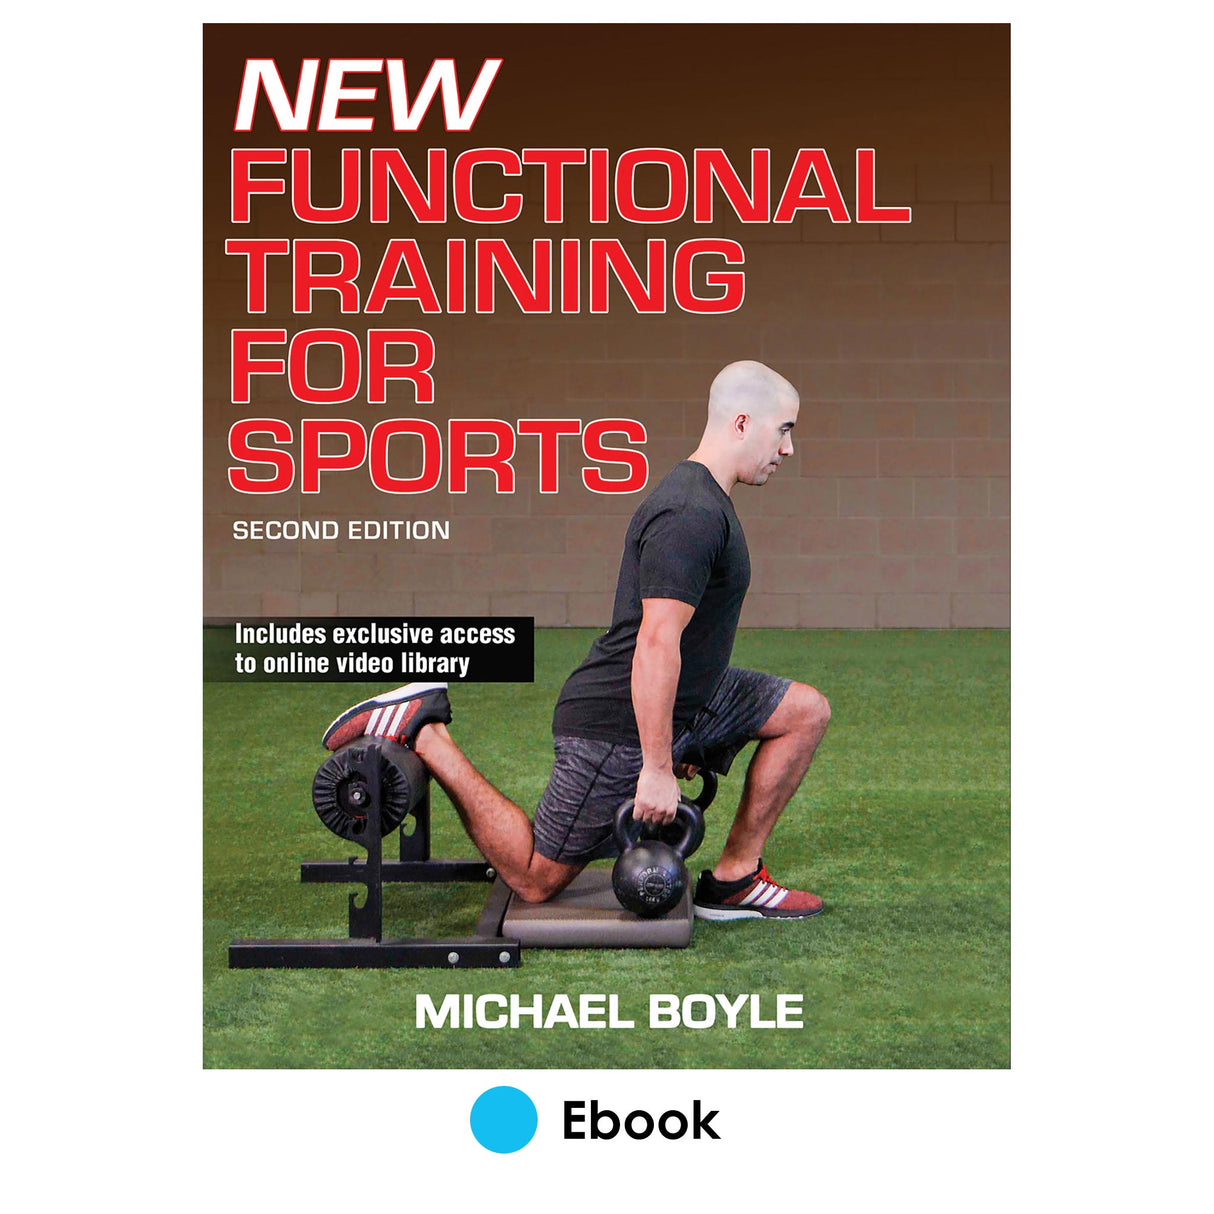 New Functional Training for Sports 2nd Edition Ebook